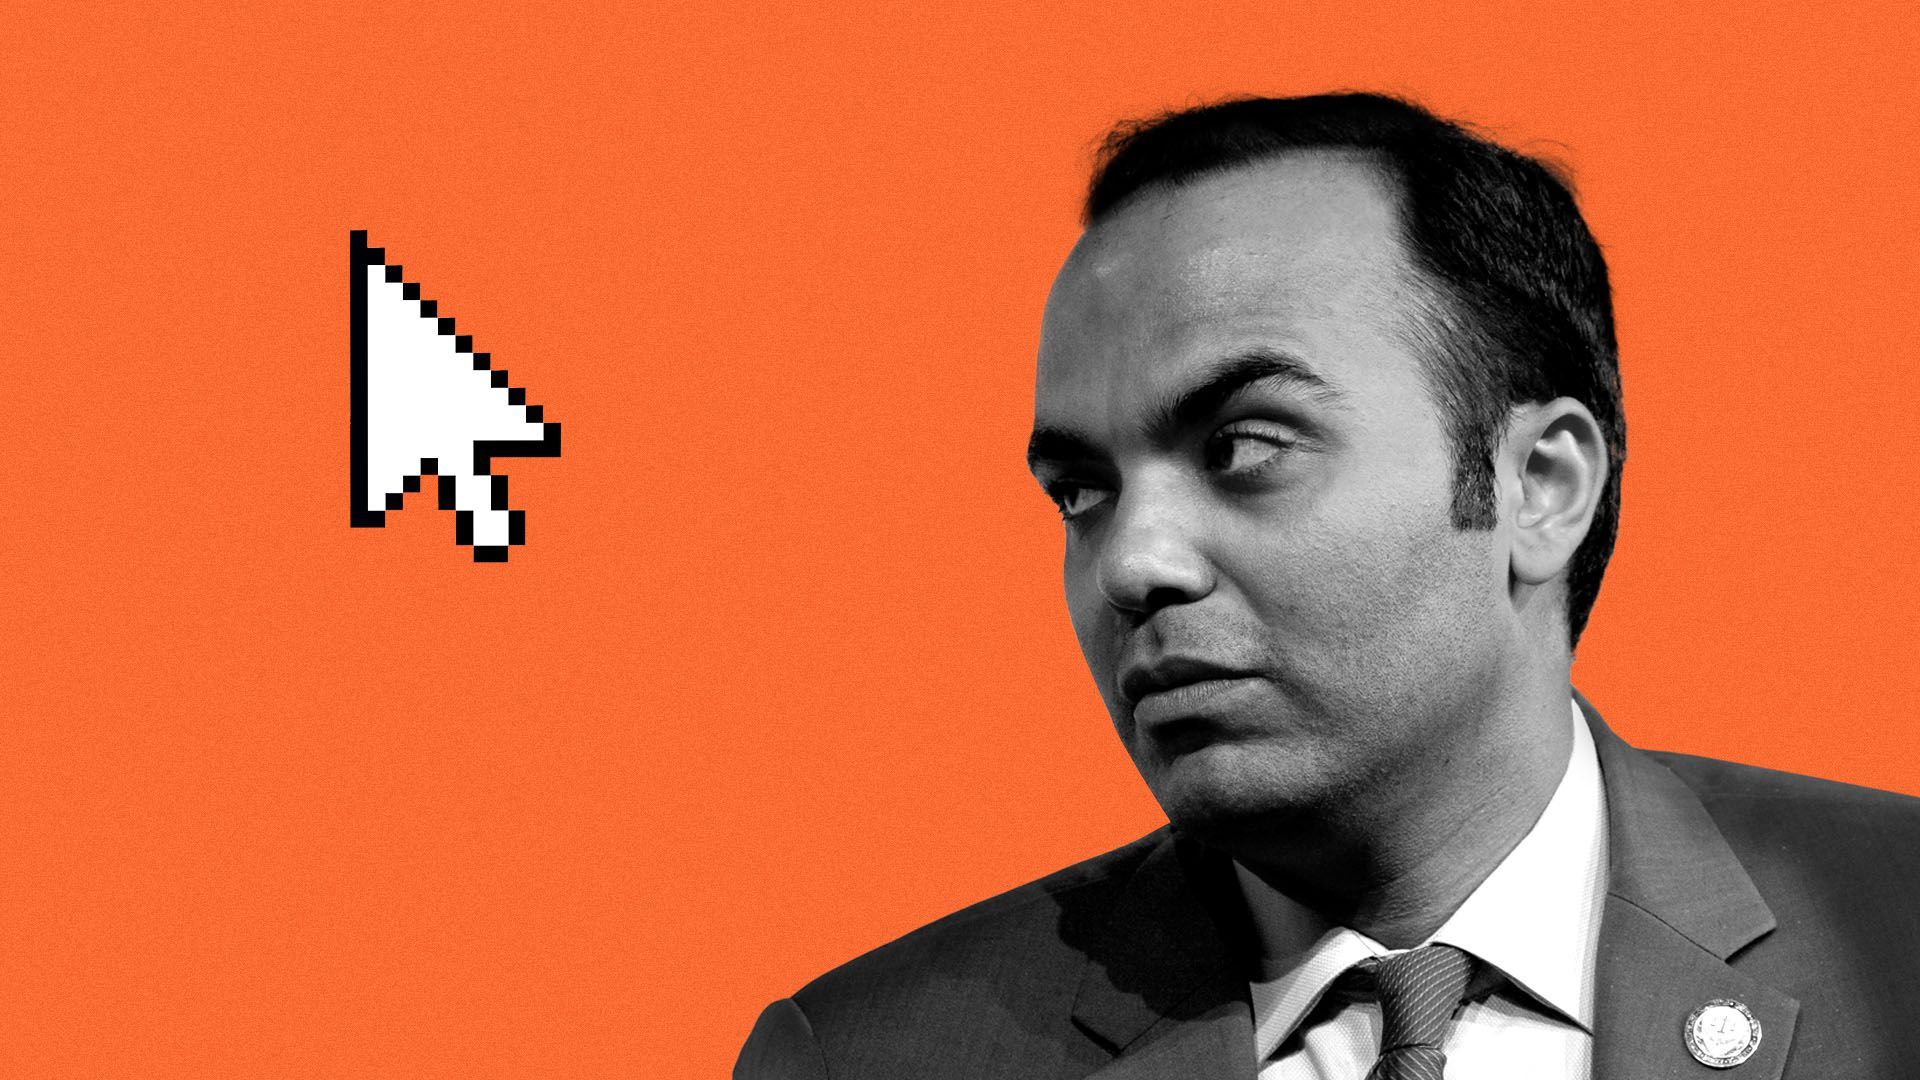 Photo illustration of FTC commissioner Rohit Chopra staring at a cursor 